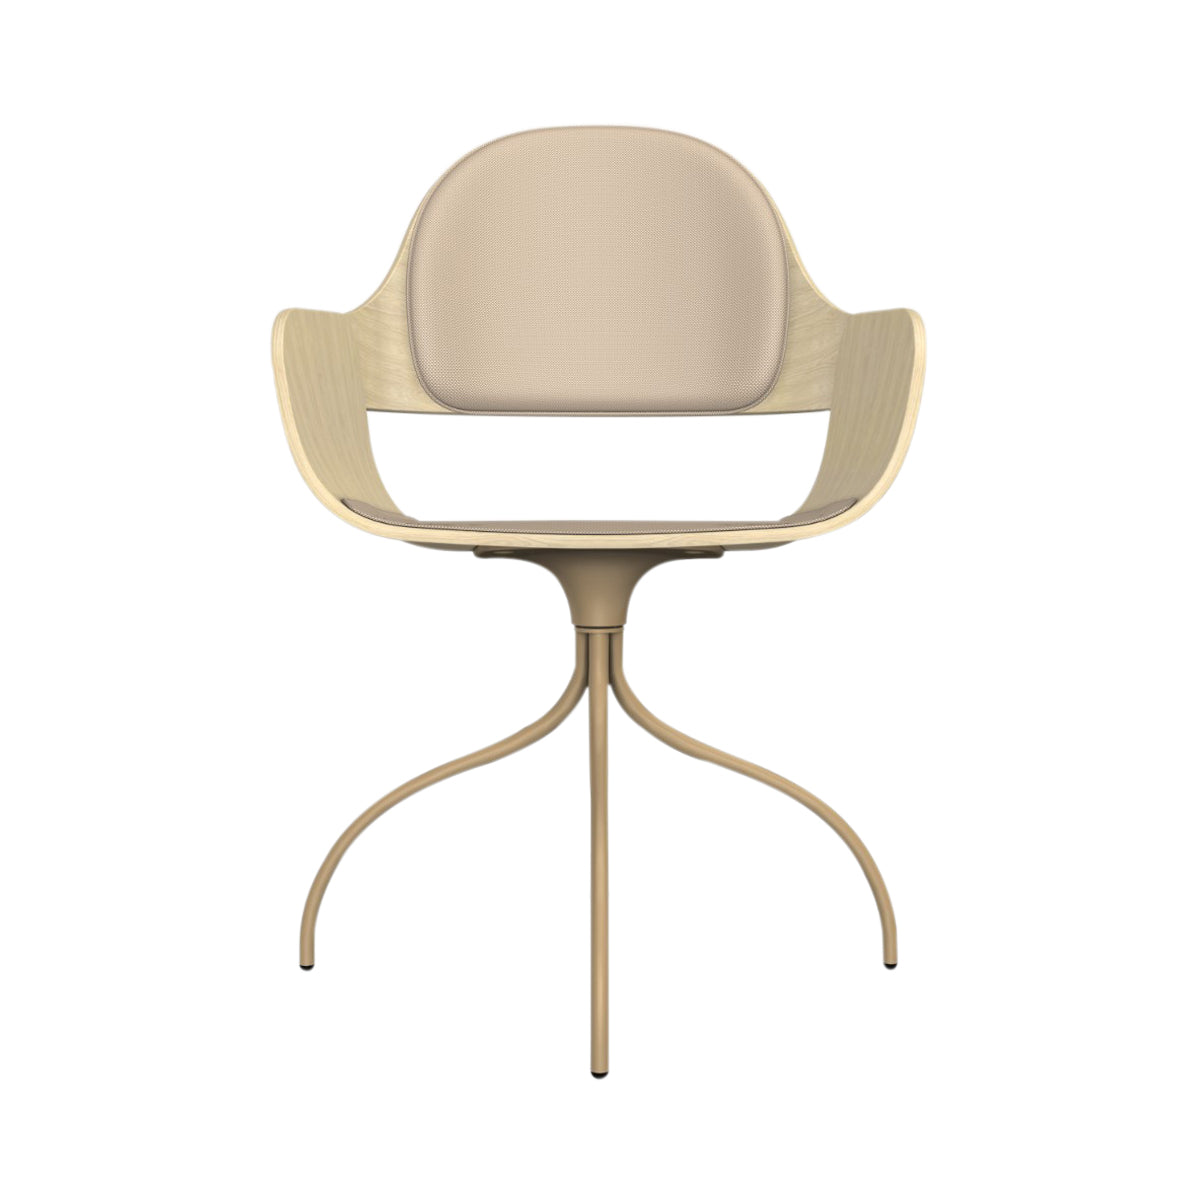 Showtime Nude Chair with Swivel Base: Seat + Backrest Cushion + Natural Ash + Beige